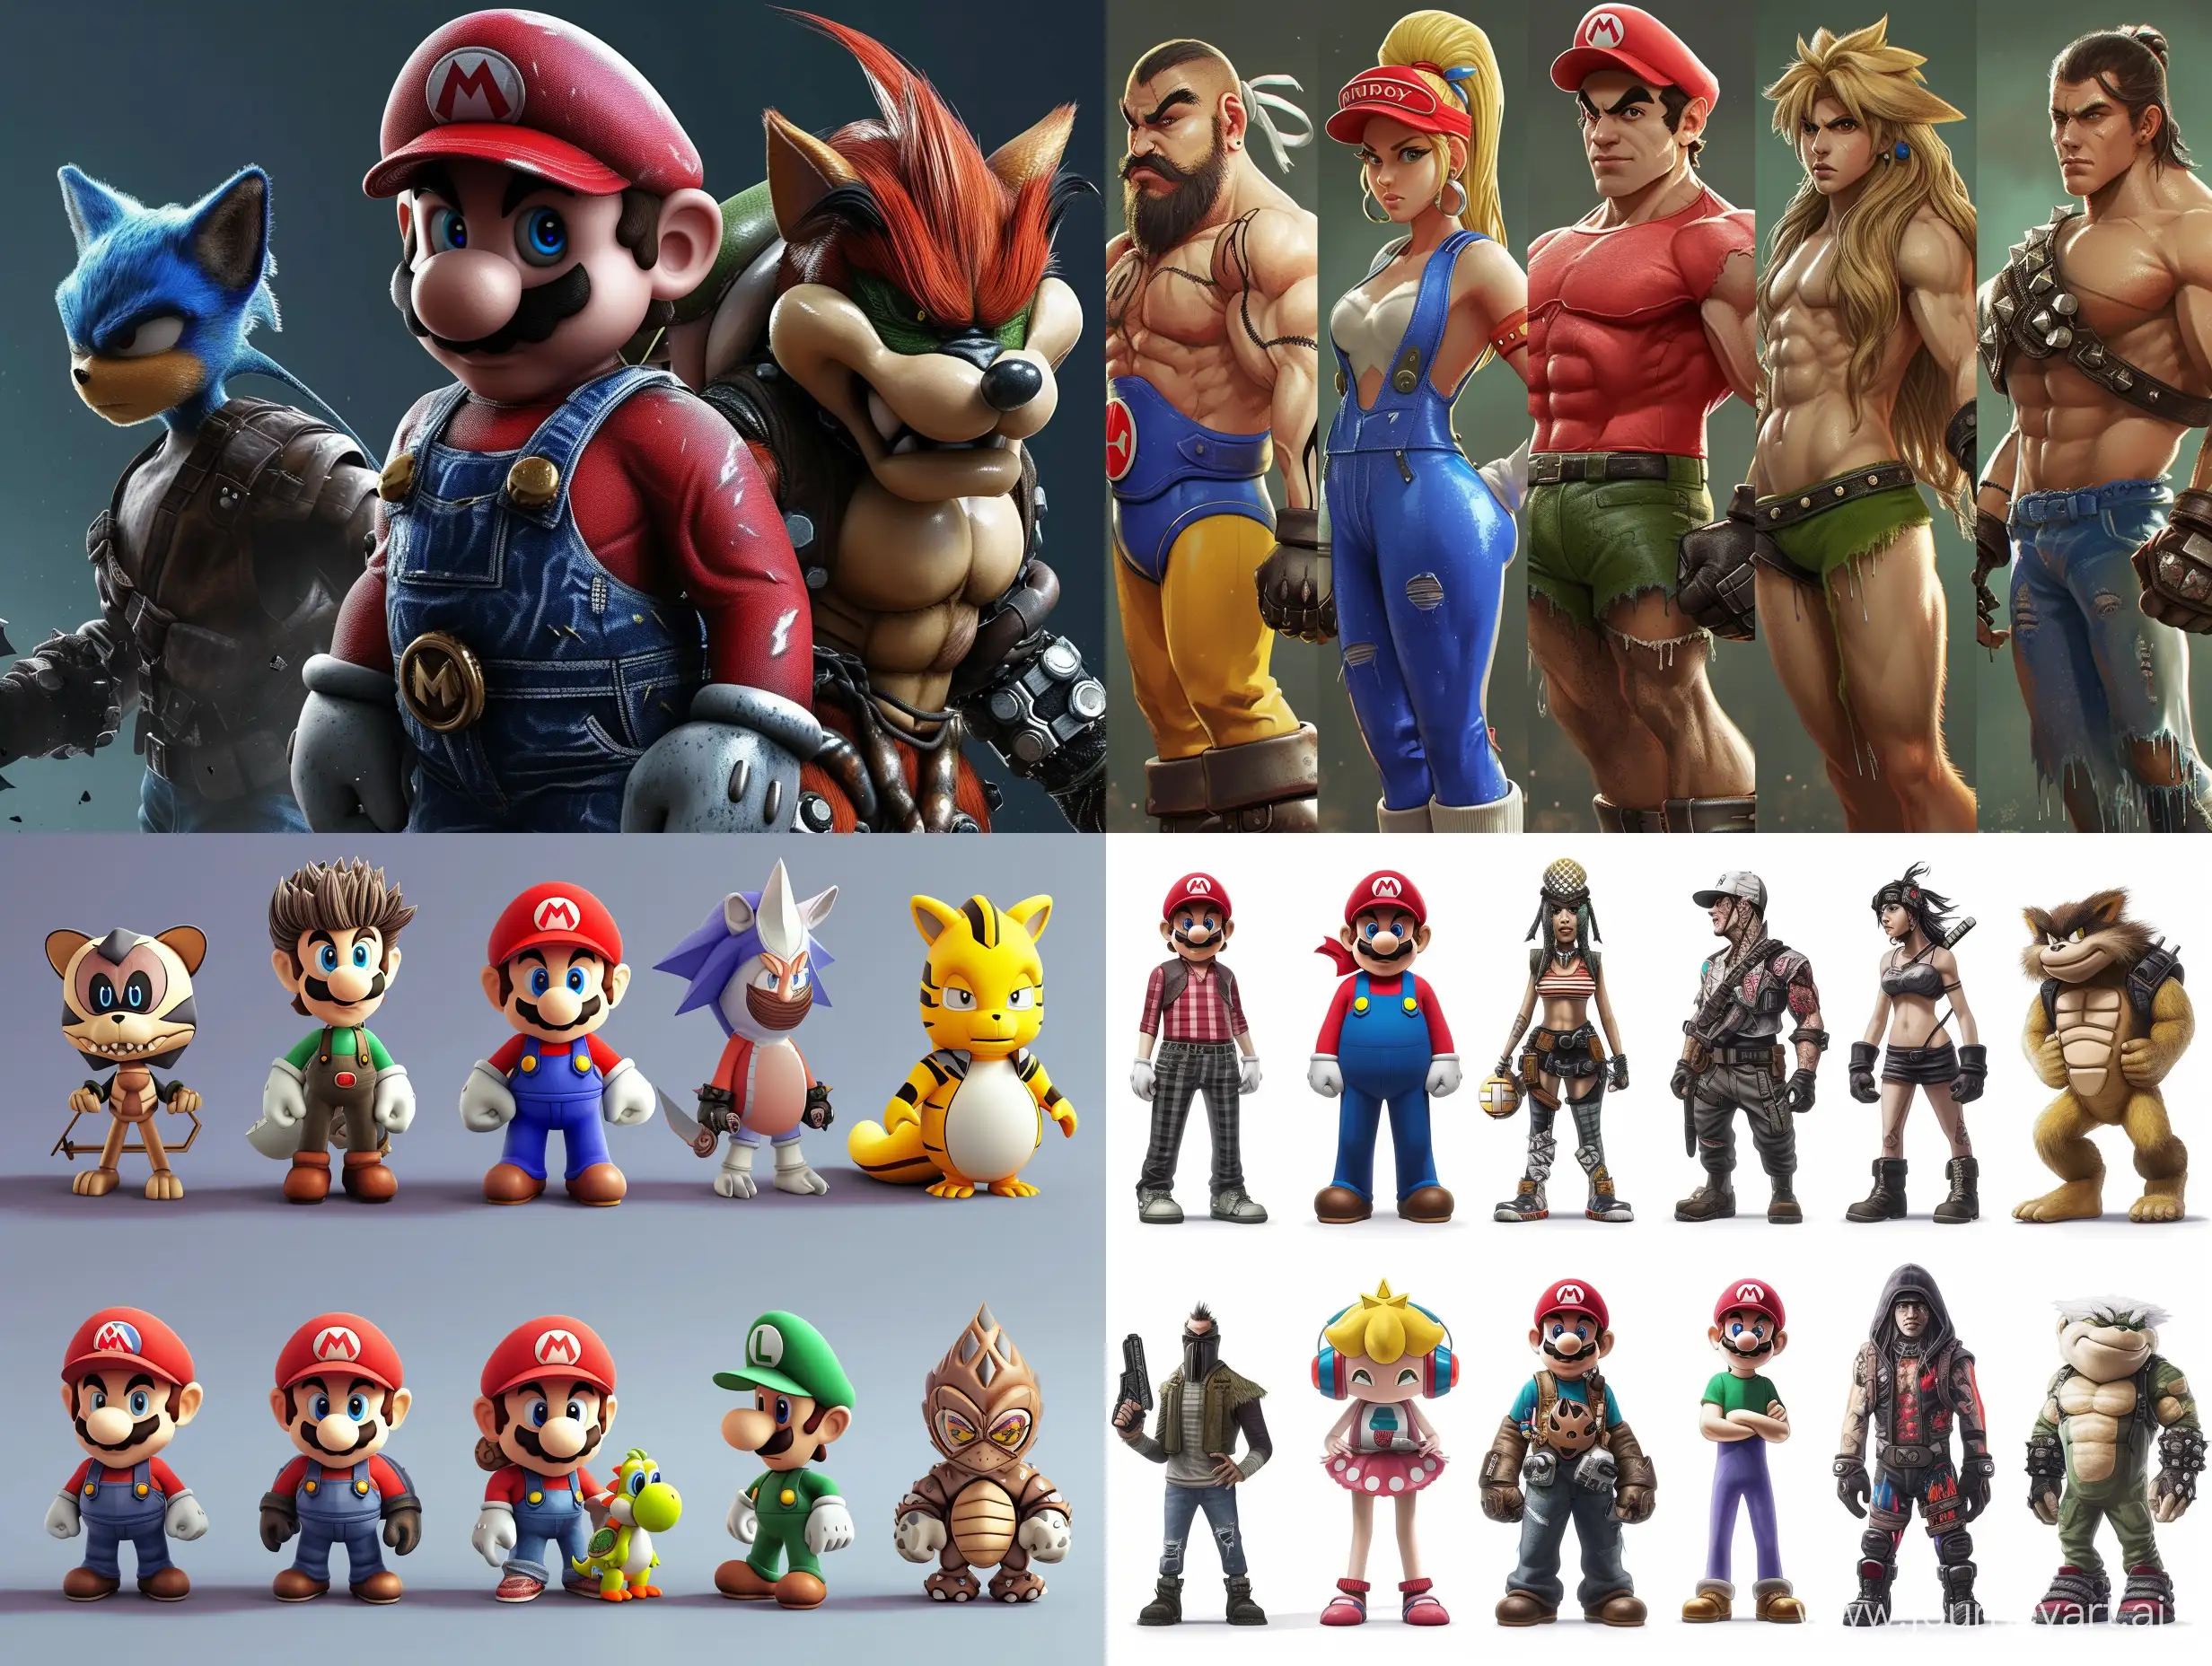 20 very detailed game characters by nintendo, sega and sony game consoles